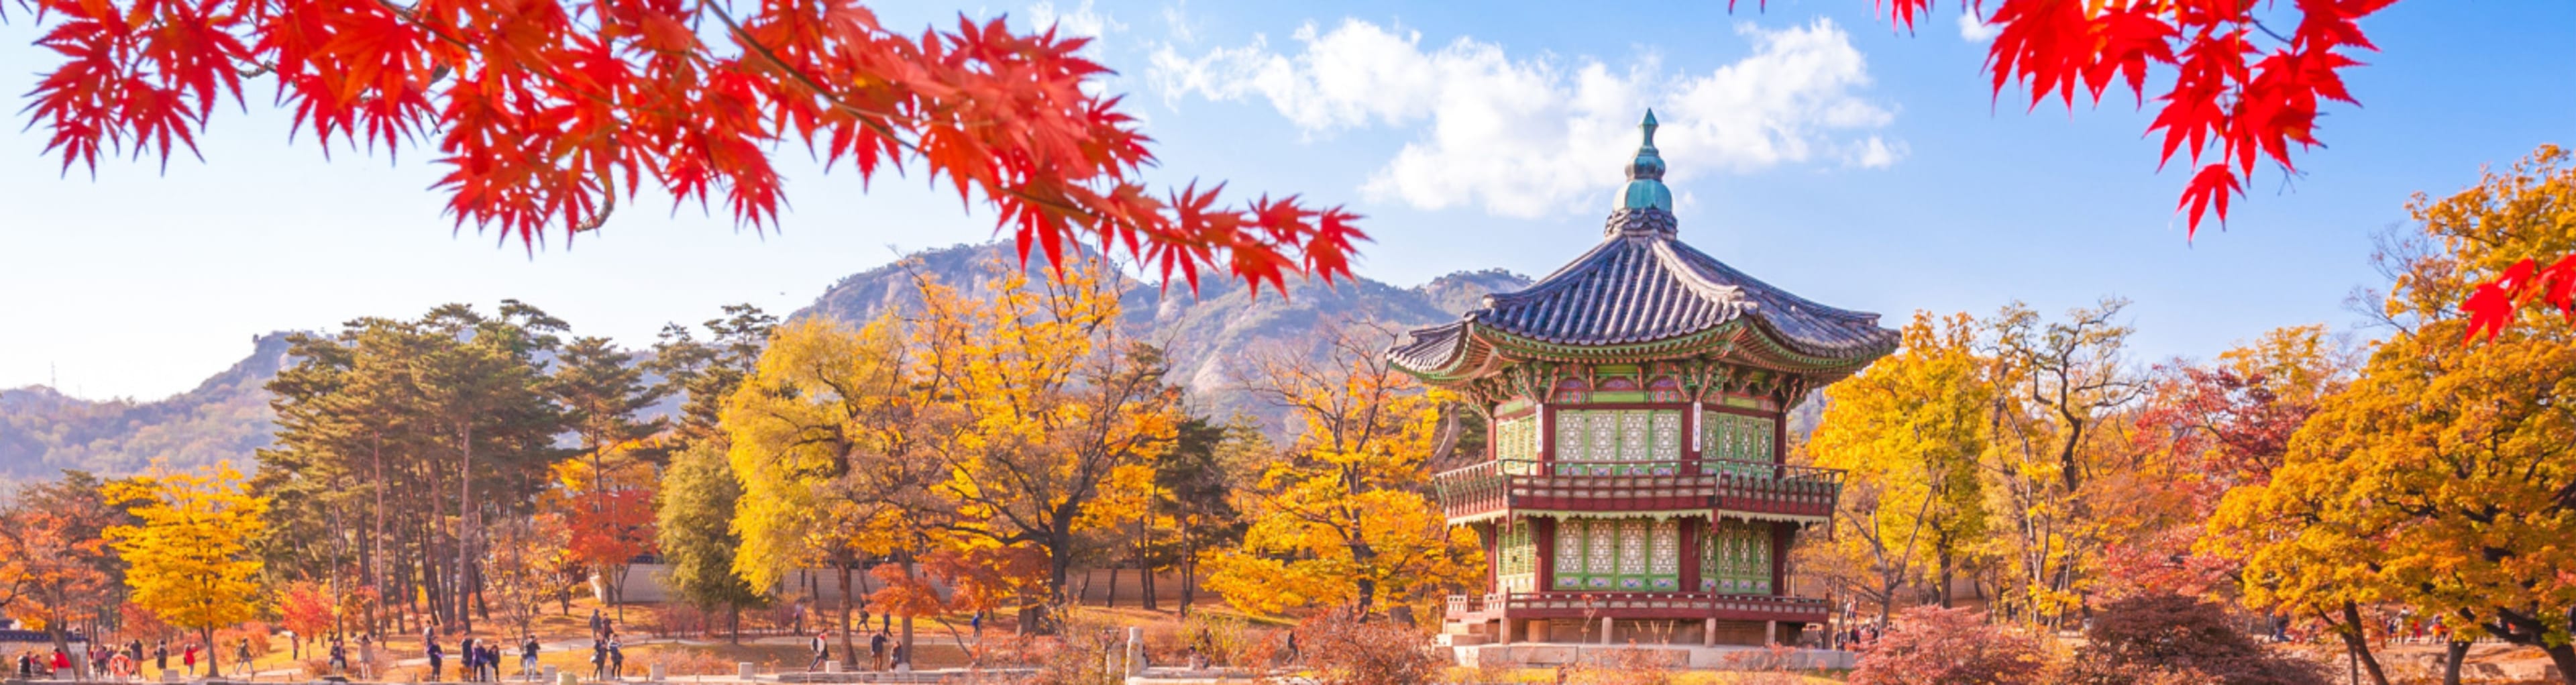 A pond with a Korean pavilion and red autumn leaves